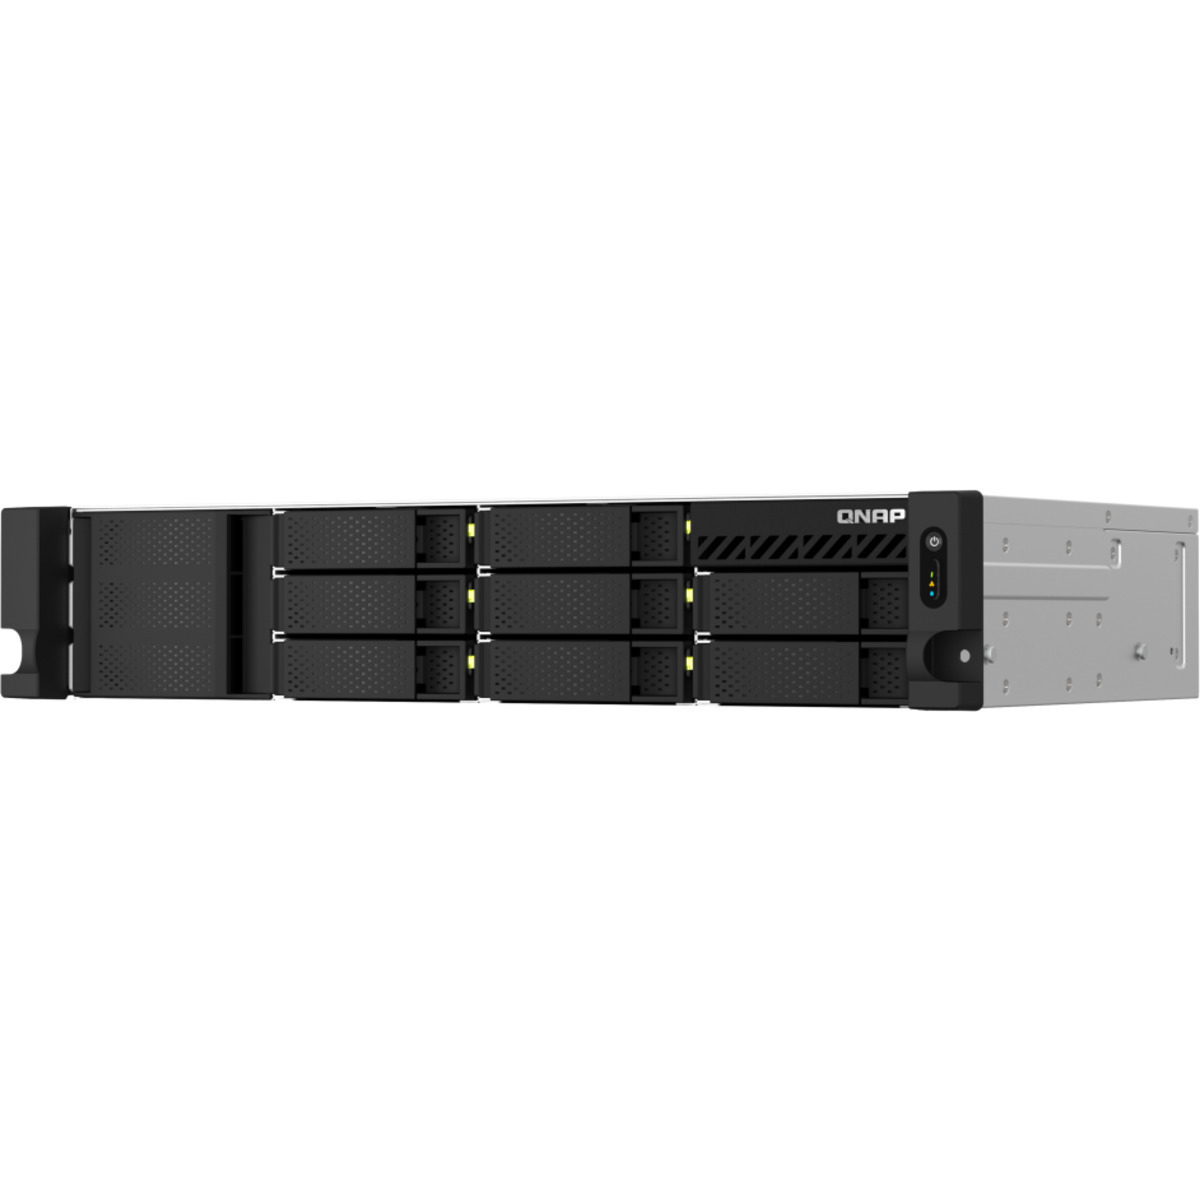 QNAP TS-864eU 24tb 8-Bay RackMount Multimedia / Power User / Business NAS - Network Attached Storage Device 4x6tb Western Digital Red Plus WD60EFPX 3.5 5640rpm SATA 6Gb/s HDD NAS Class Drives Installed - Burn-In Tested TS-864eU